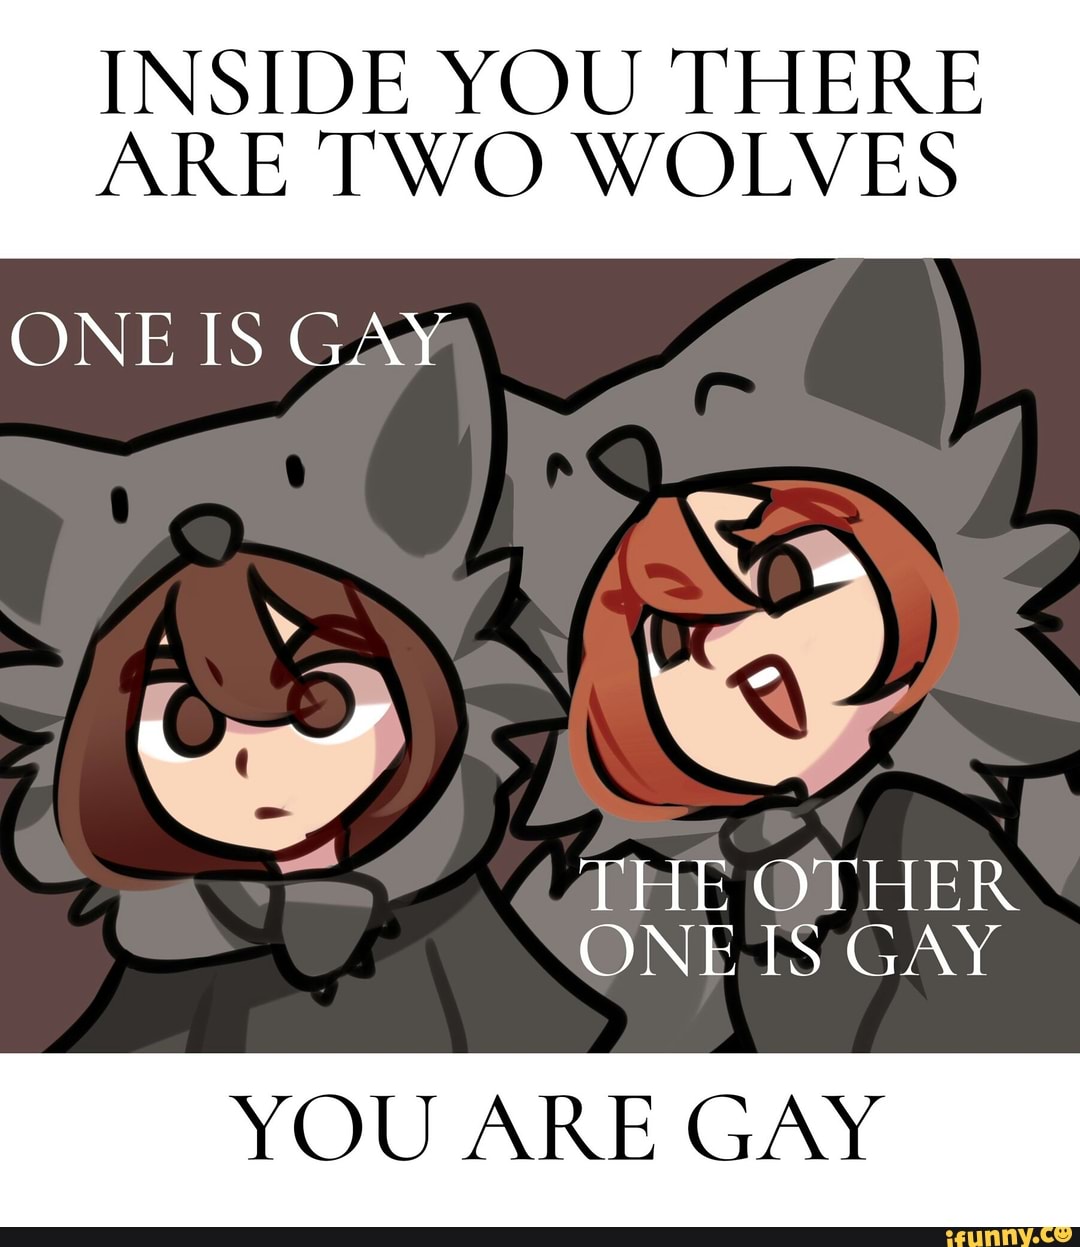 Inside you there are two wolves one is gay the other one is gay you are gay...